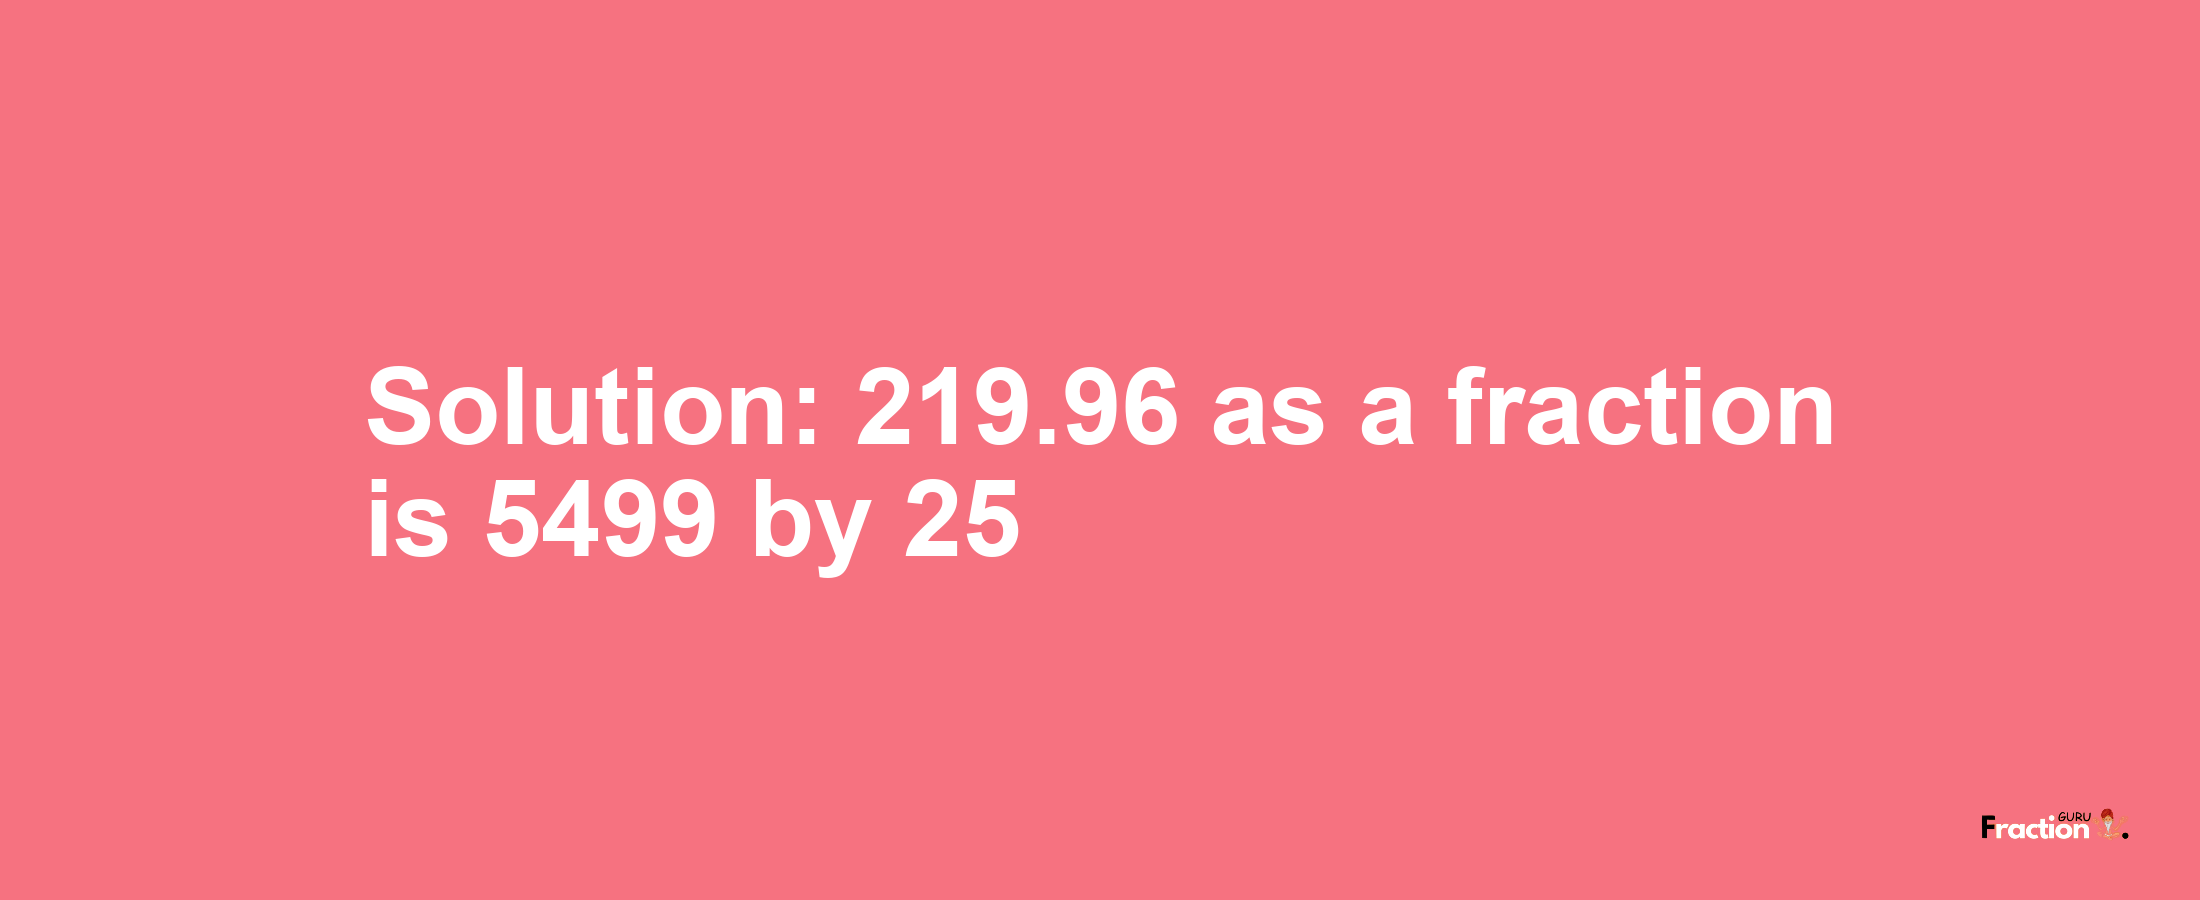 Solution:219.96 as a fraction is 5499/25